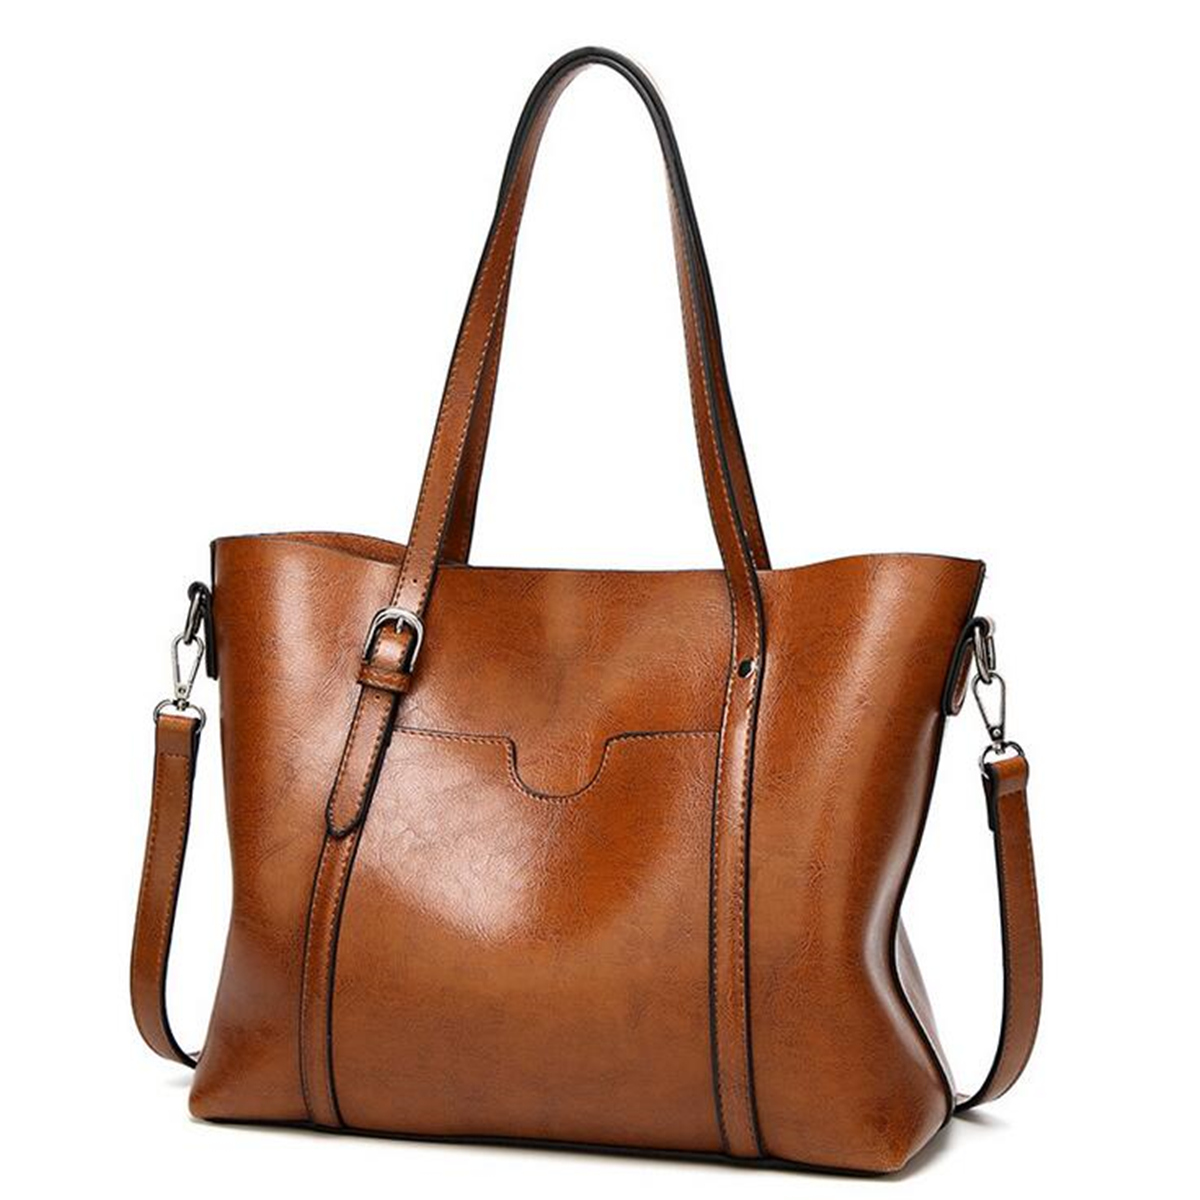 4 Colors Fashion Leather Handbag Shoulder Bag Crossbody Bag Travel Shopping Tote Purse Tassel Large With Zipper for Women Christmas Girls Lady 12.6 x 4.72 x 11.42 inches - image 1 of 12